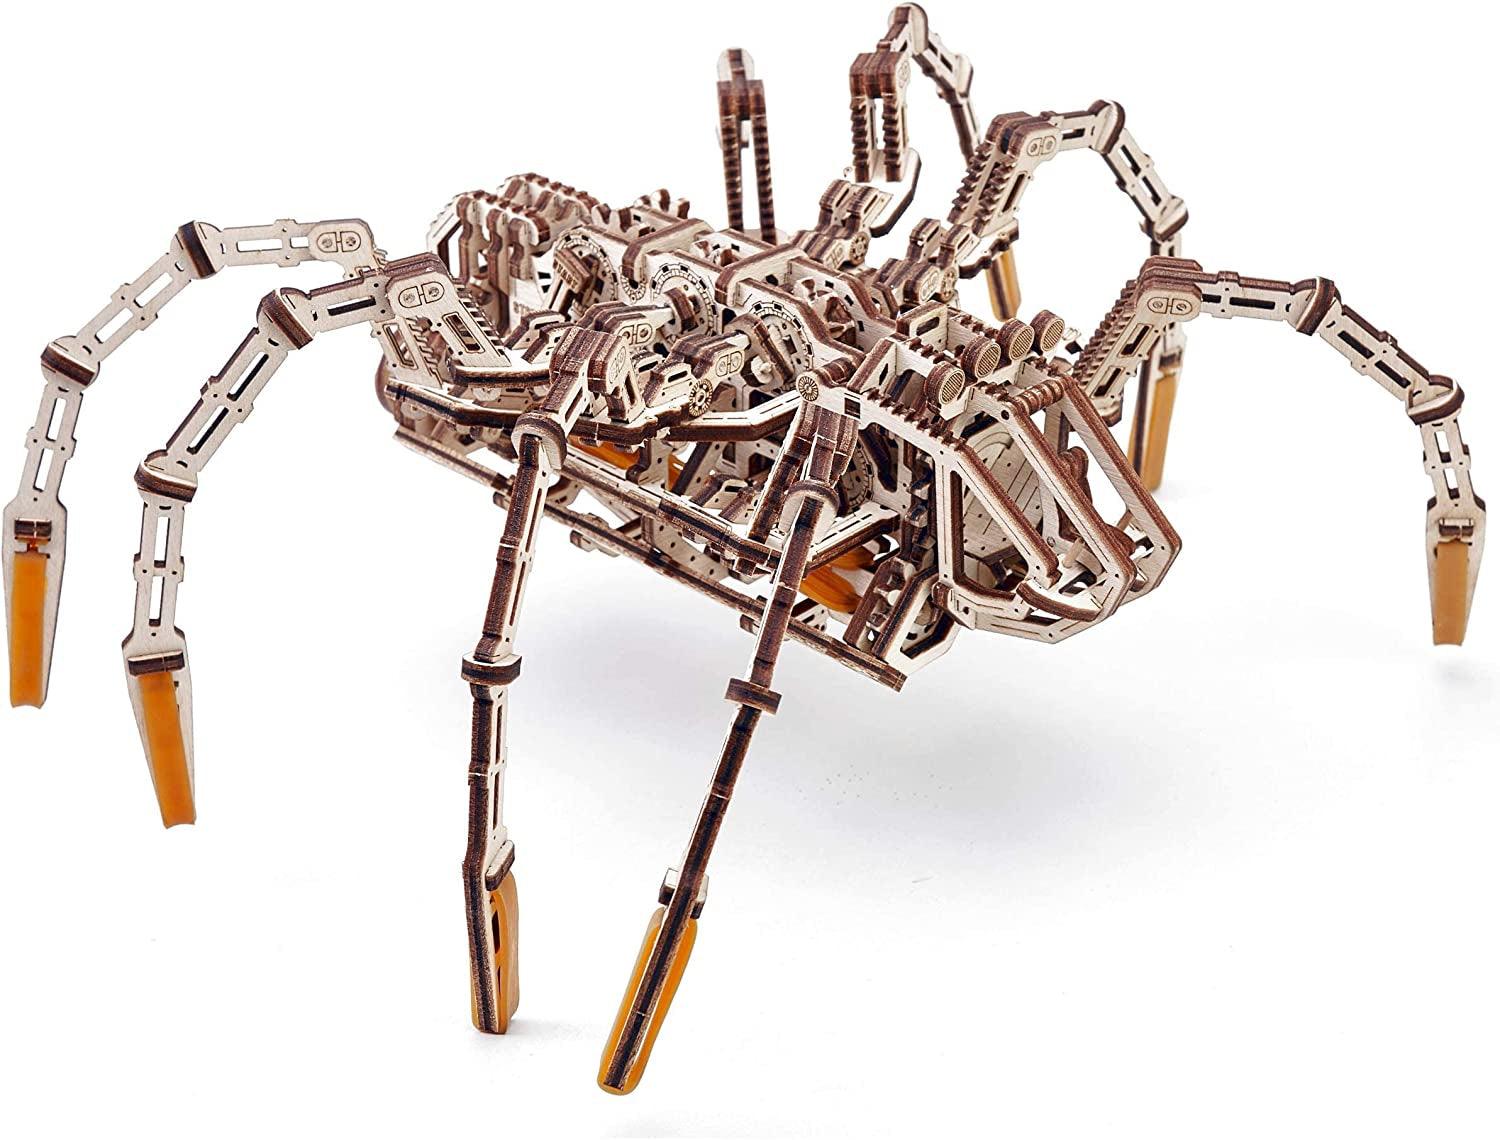 Wood Trick Mechanical Spider 3D Wooden Puzzle - Runs up to 7 Feet - Wooden Model Kit - WoodArtSupply